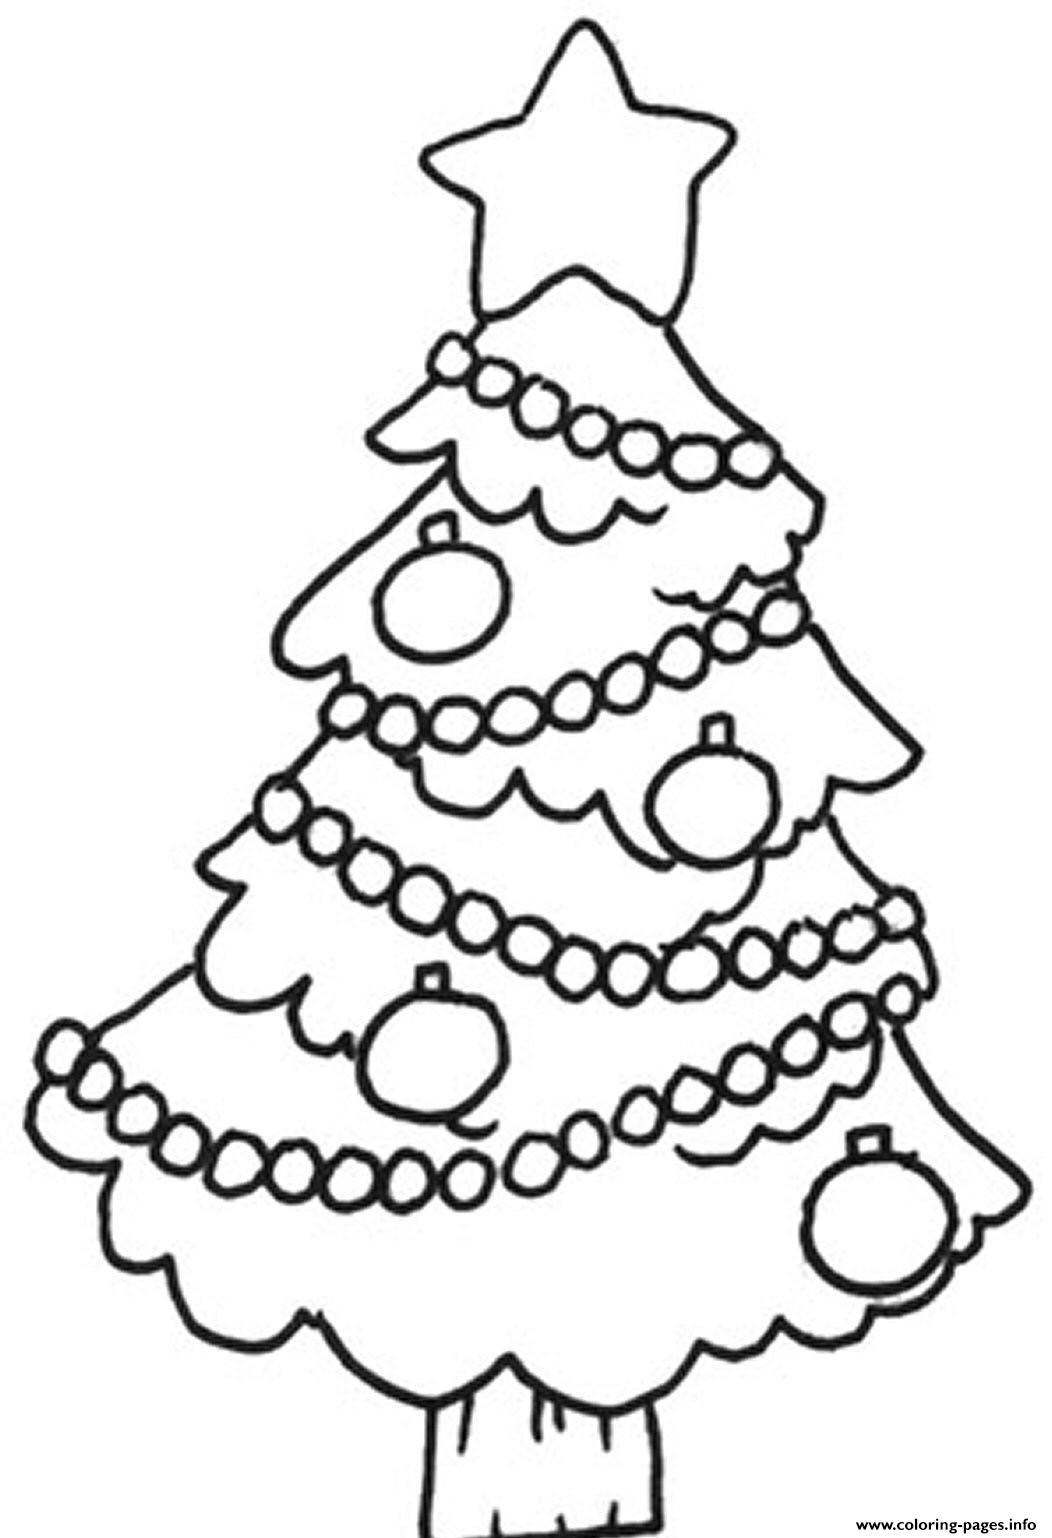 Easy Christmas Tree S For Childrenb7ca coloring